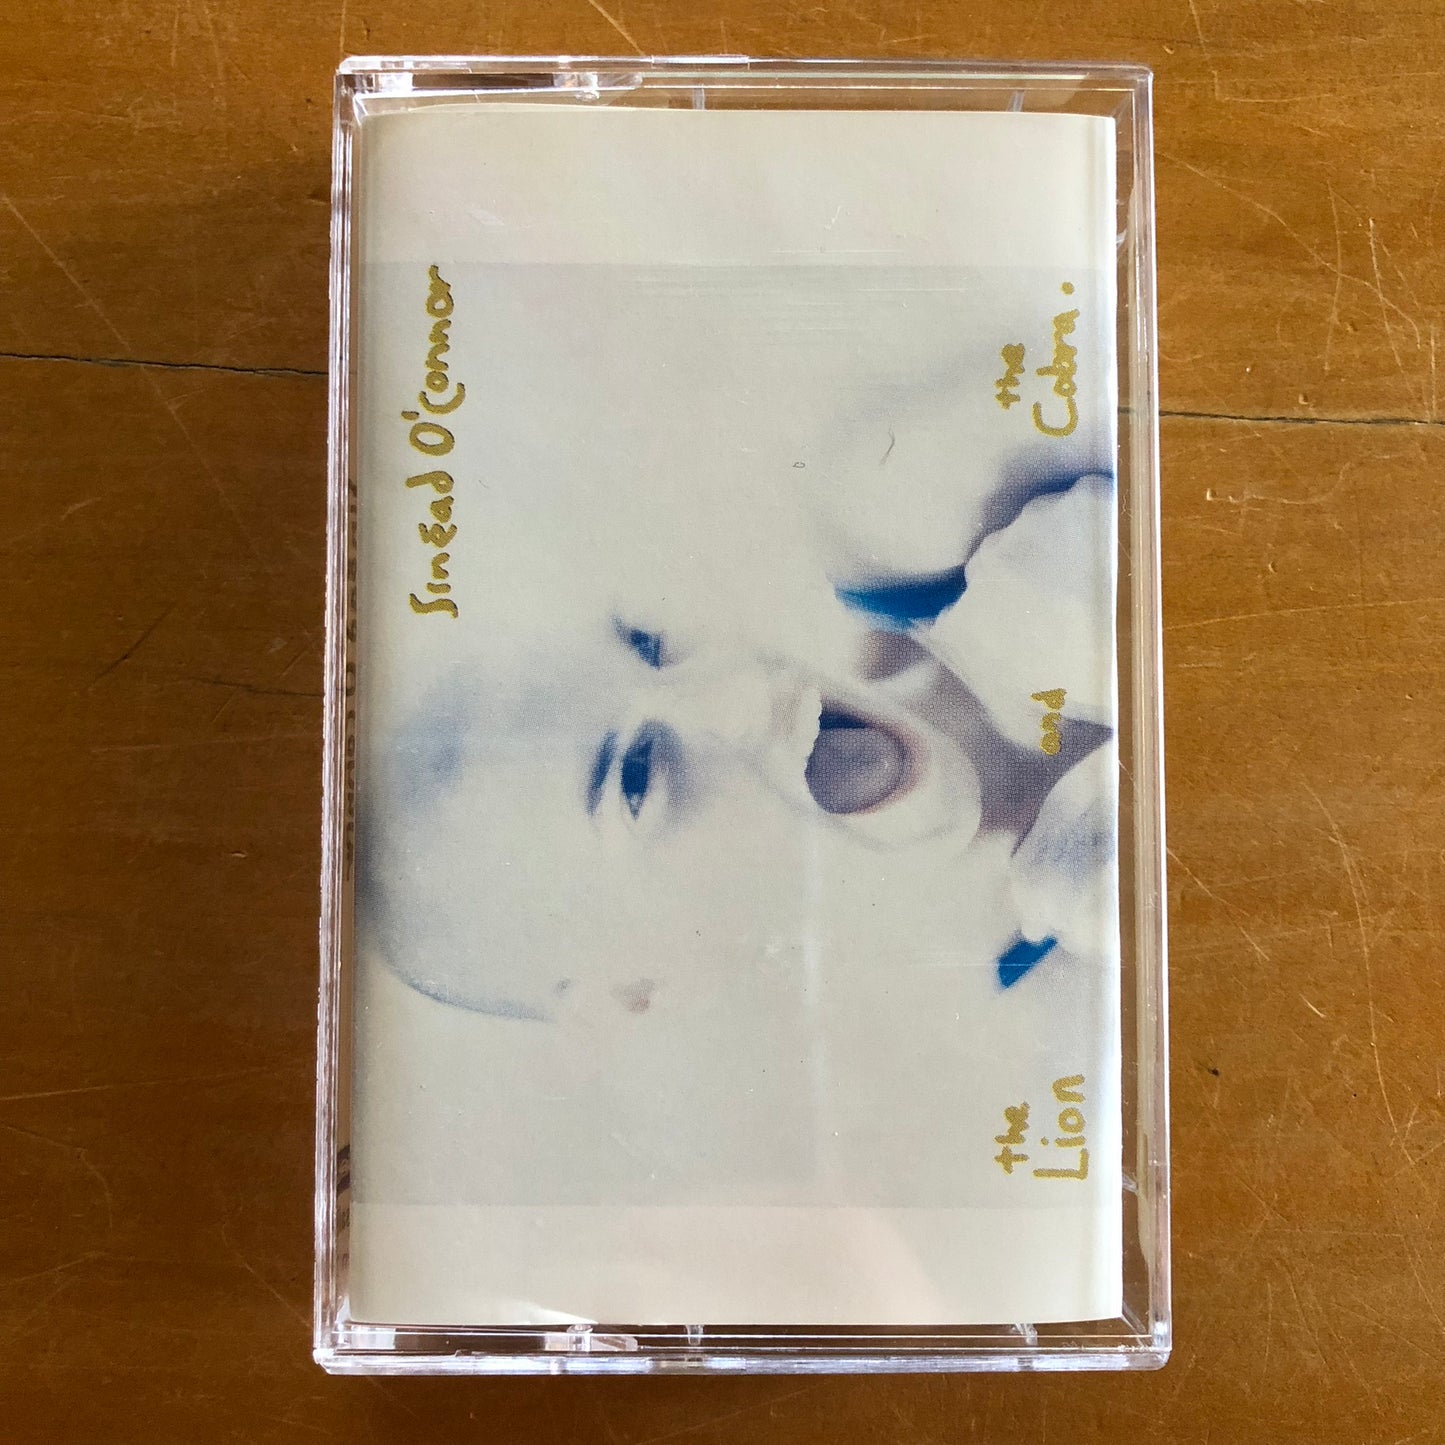 Sinéad O'Connor - The Lion and the Cobra (cassette)